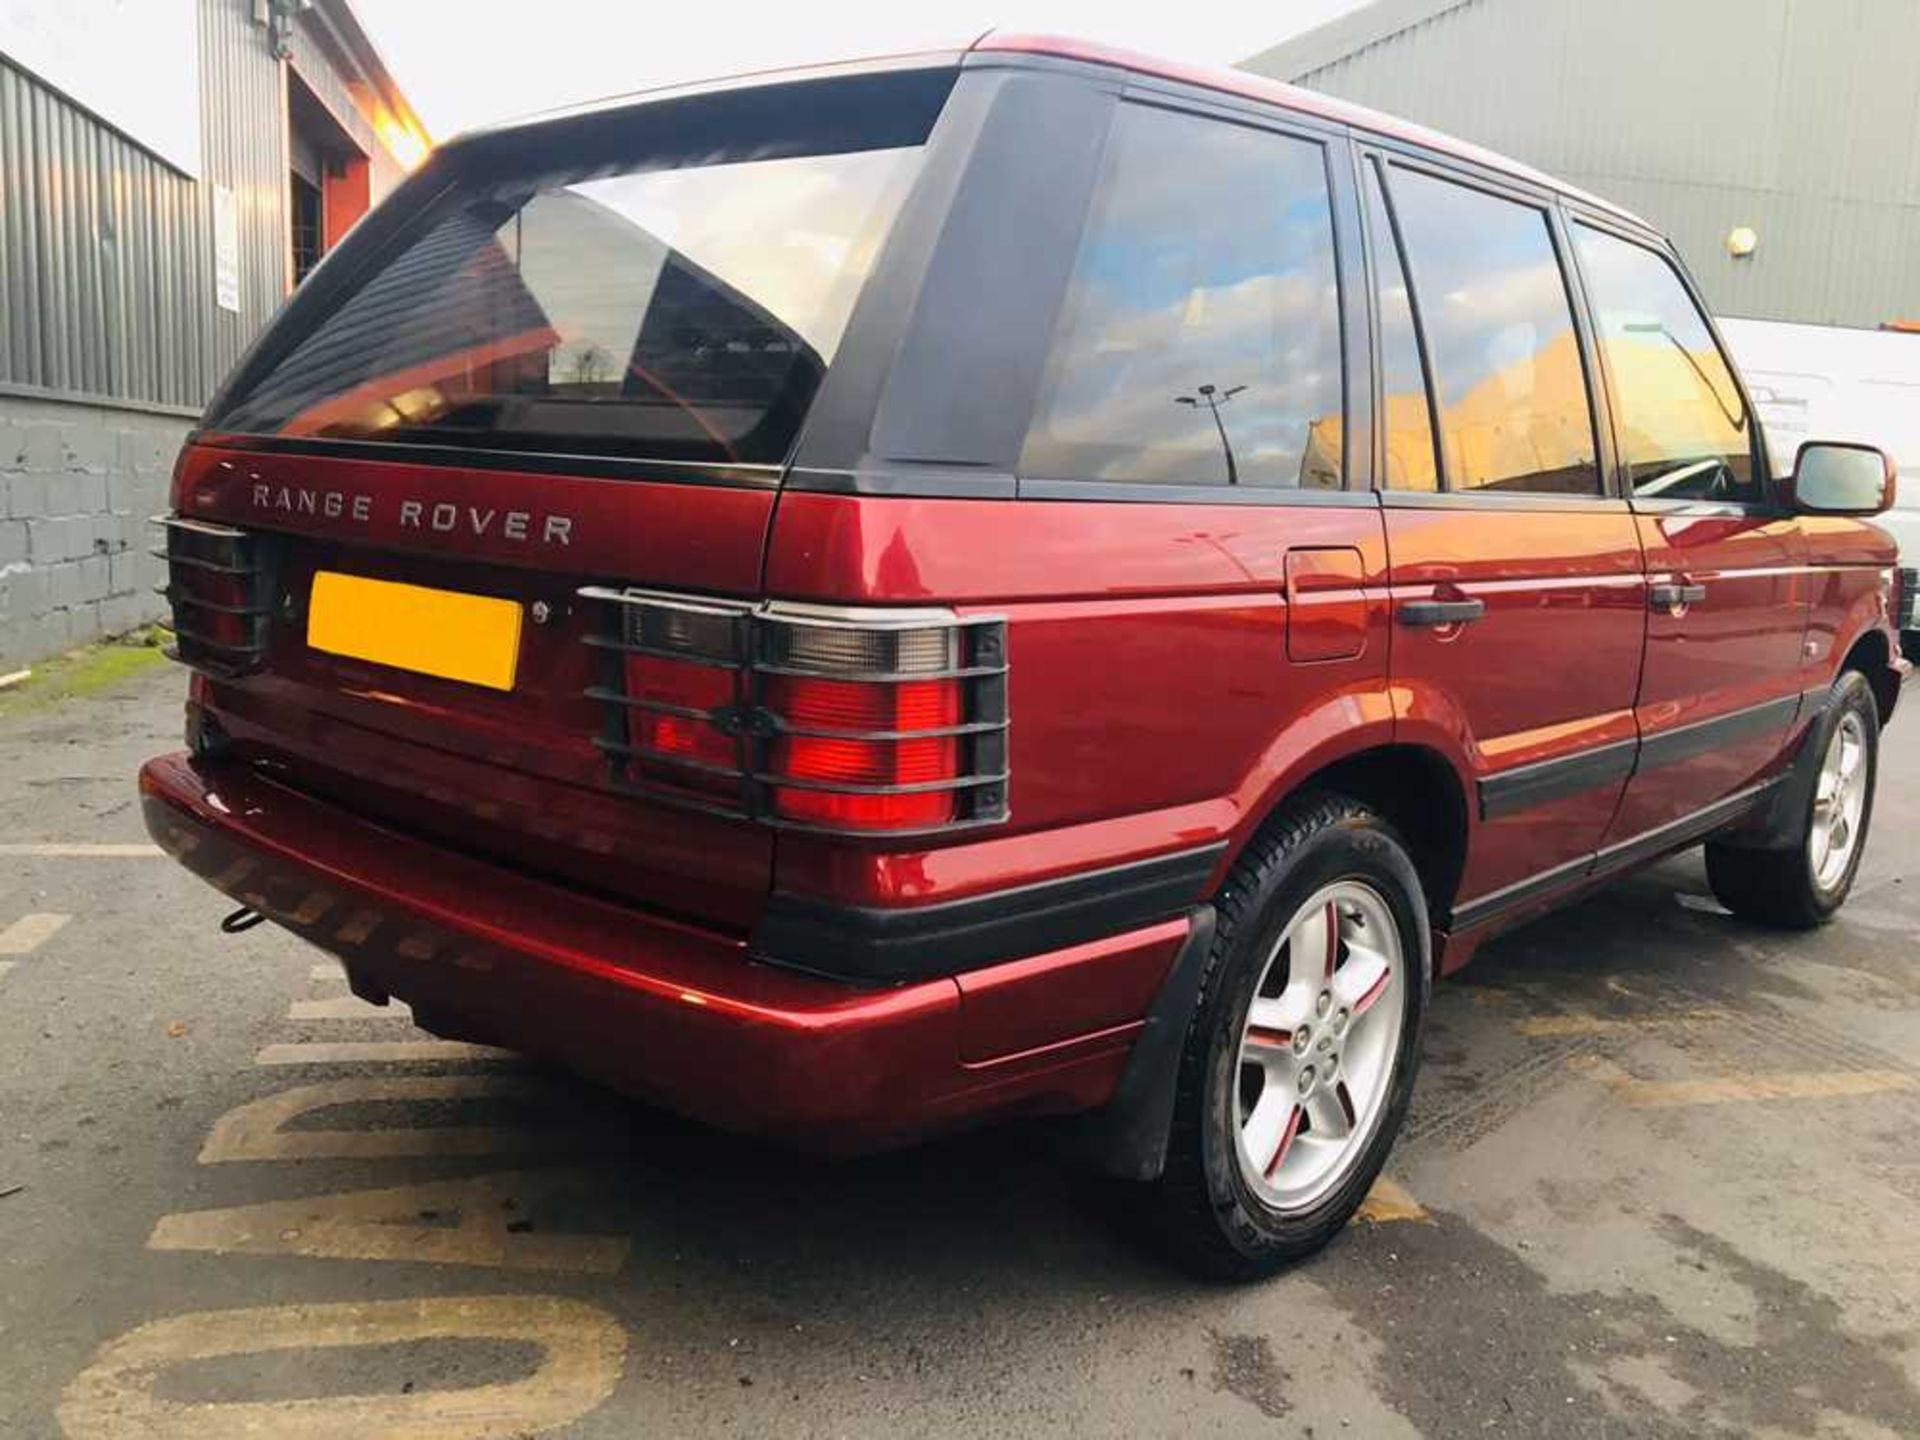 2001 Range Rover 2.5 TD Bordeaux One of just 200 UK-supplied limited edition 'Bordeaux' examples - Image 6 of 20